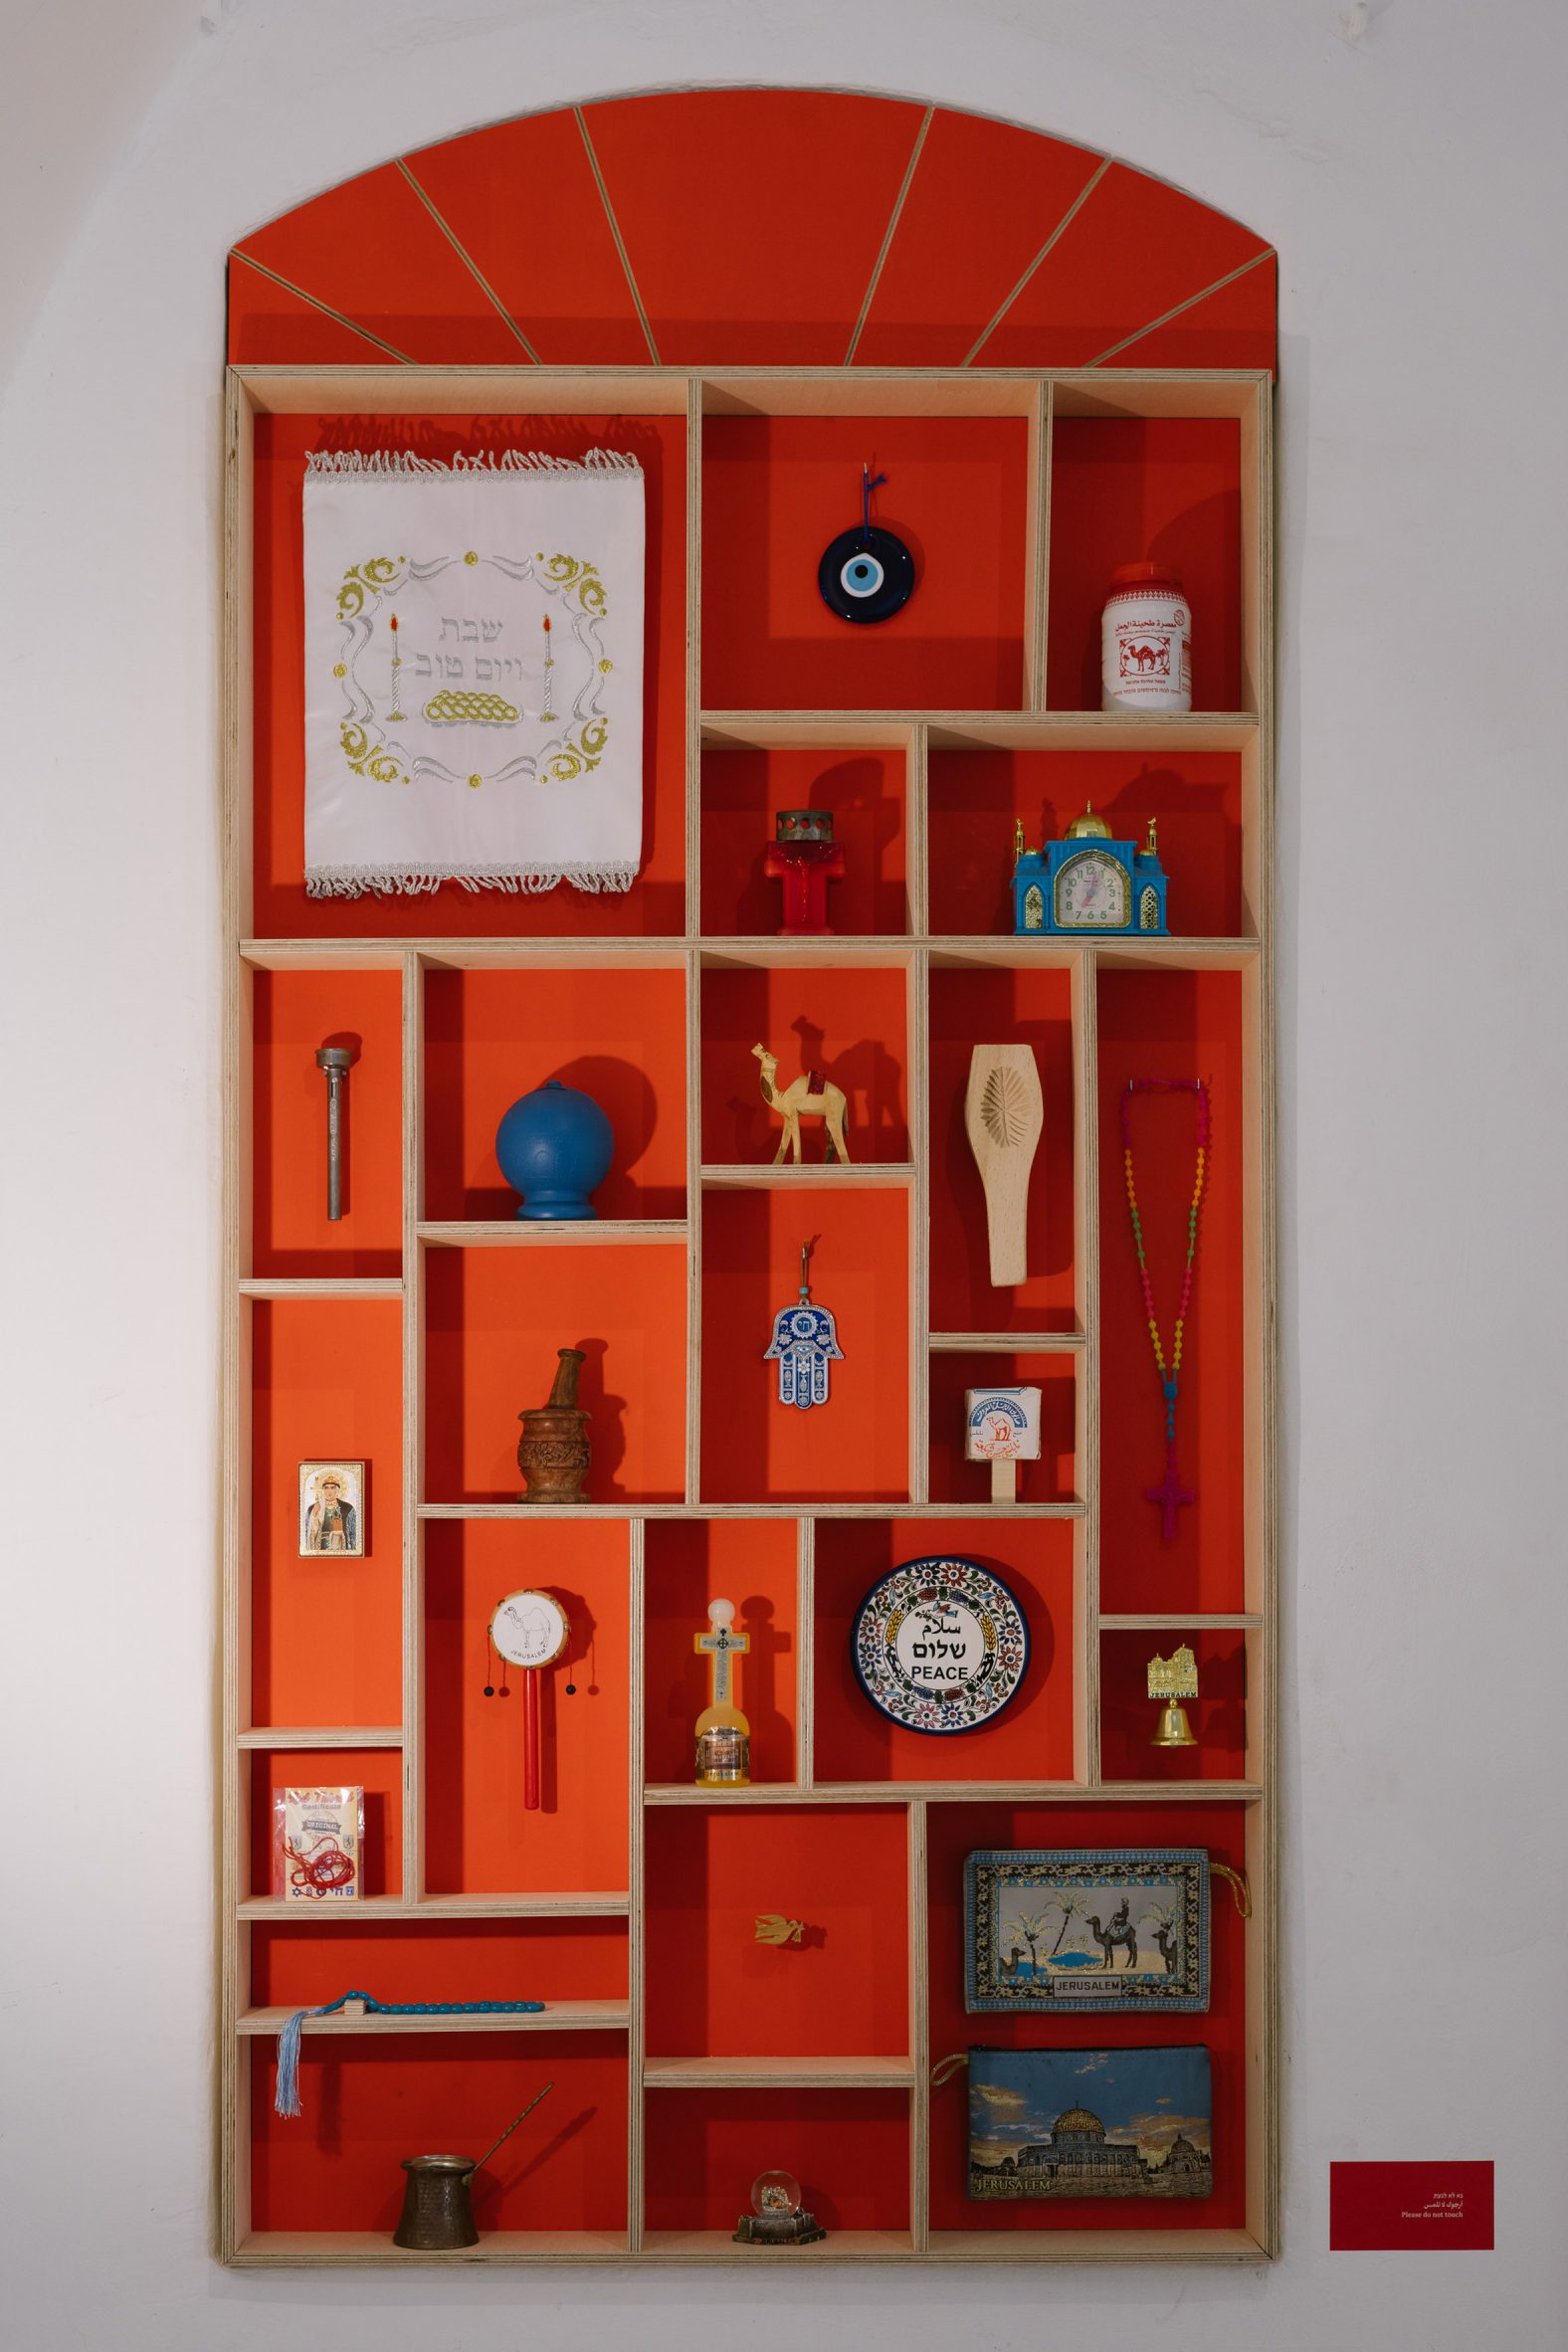 Gridded wooden shelving with traditional Israeli objects displayed